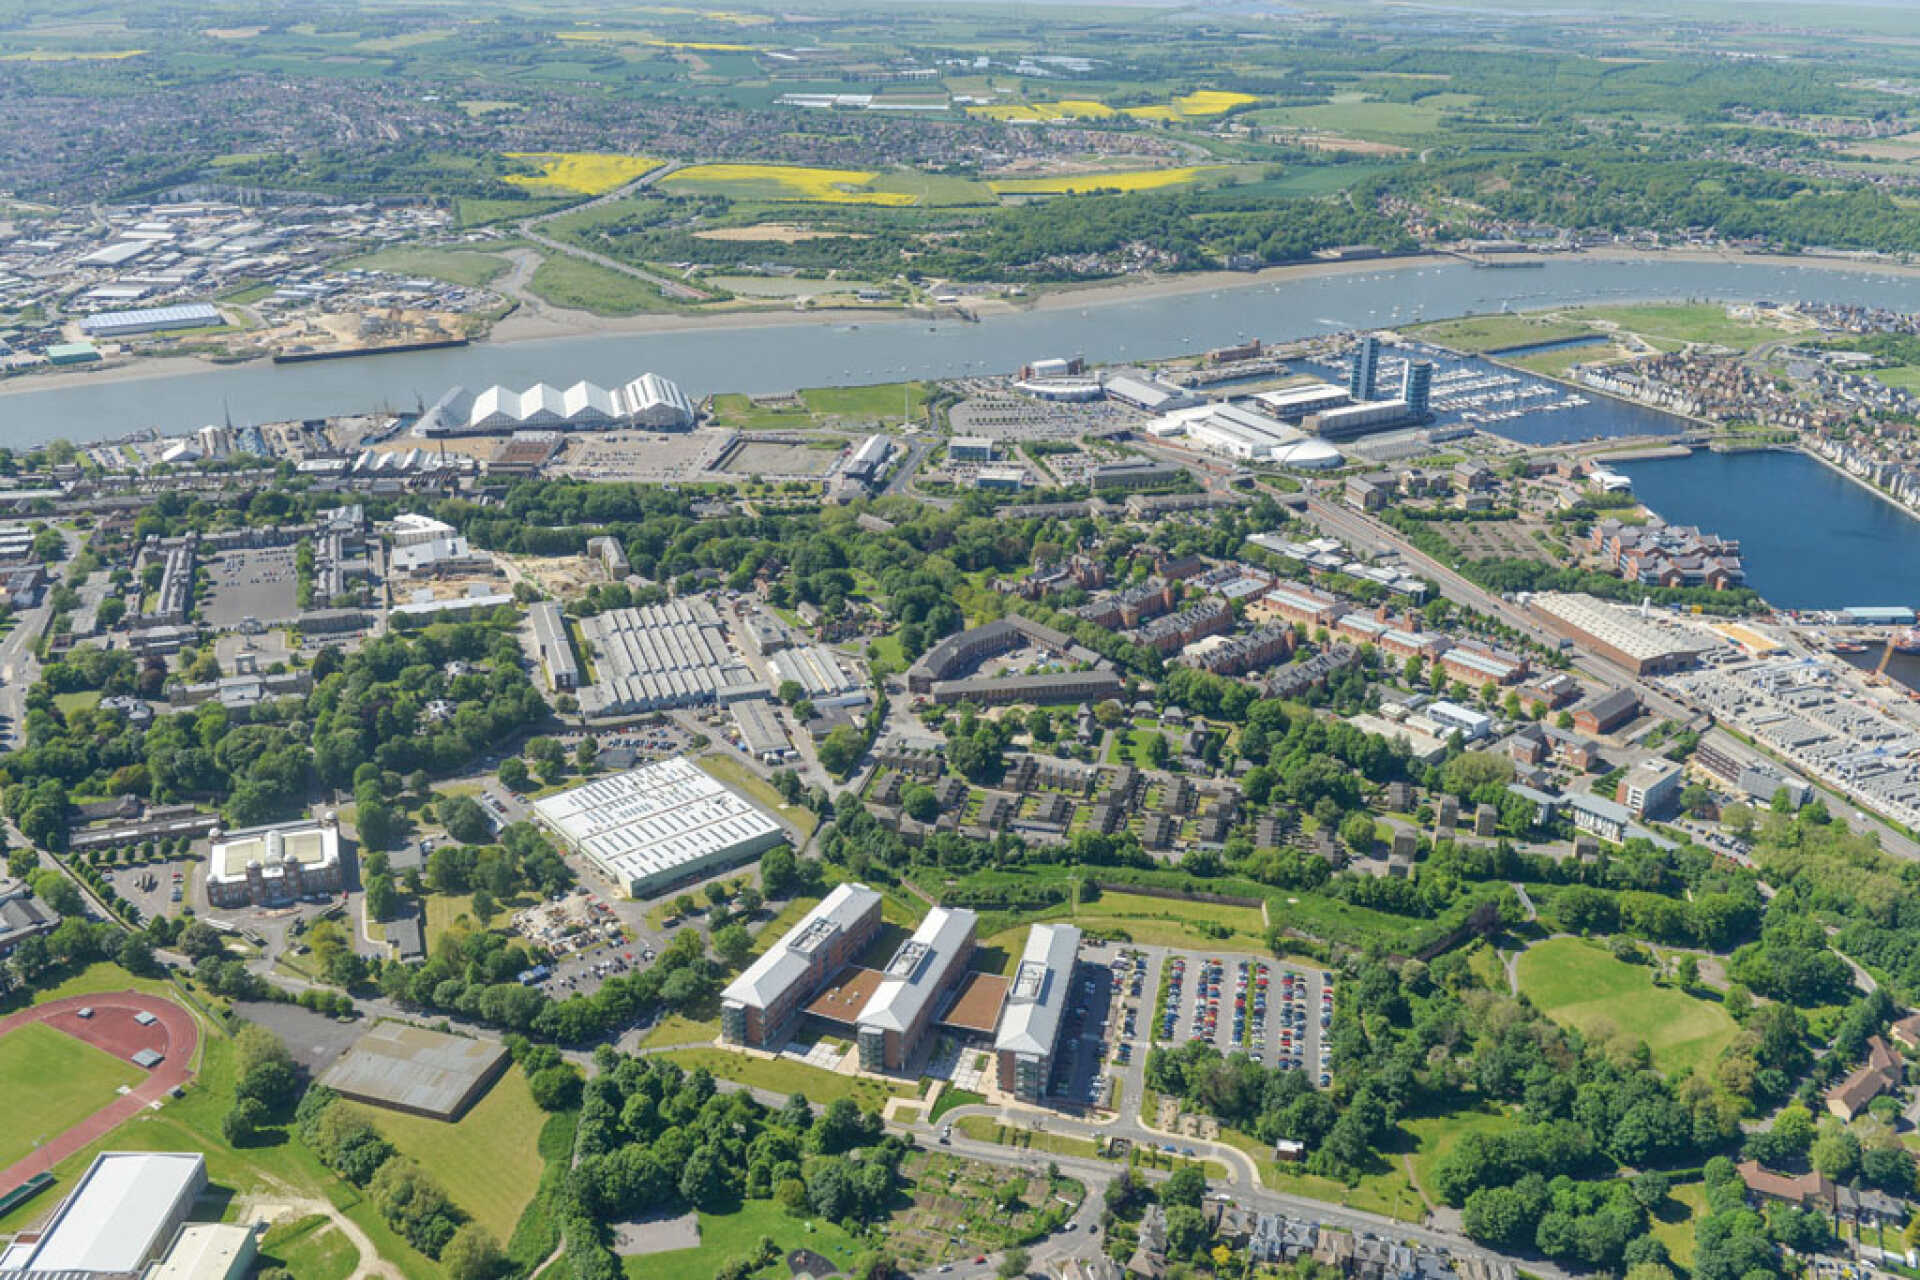 Aerial view of the Medway campus sites